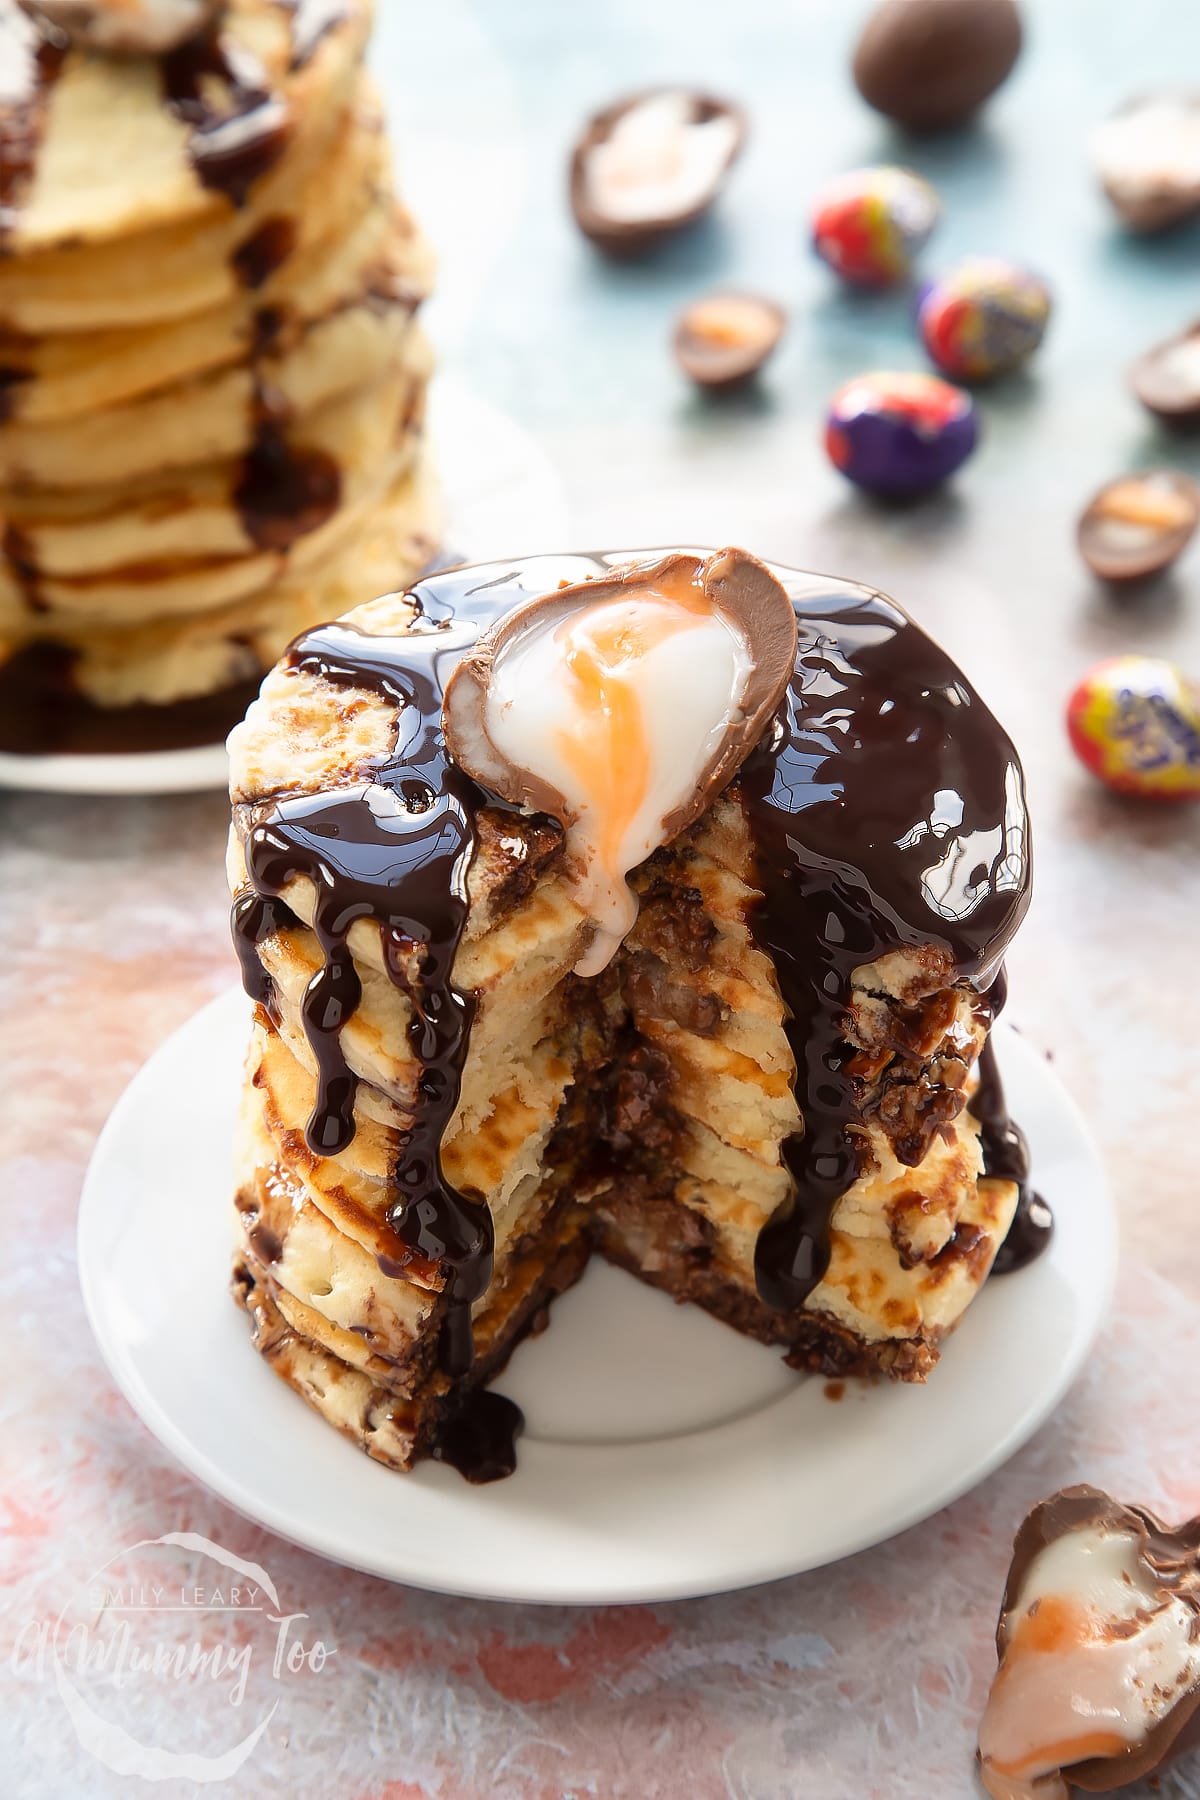 A tall stack of Creme Egg pancakes on a small white plate. The stack is topped with chocolate sauce and a Creme Egg half. It has a wedge cut out of it.